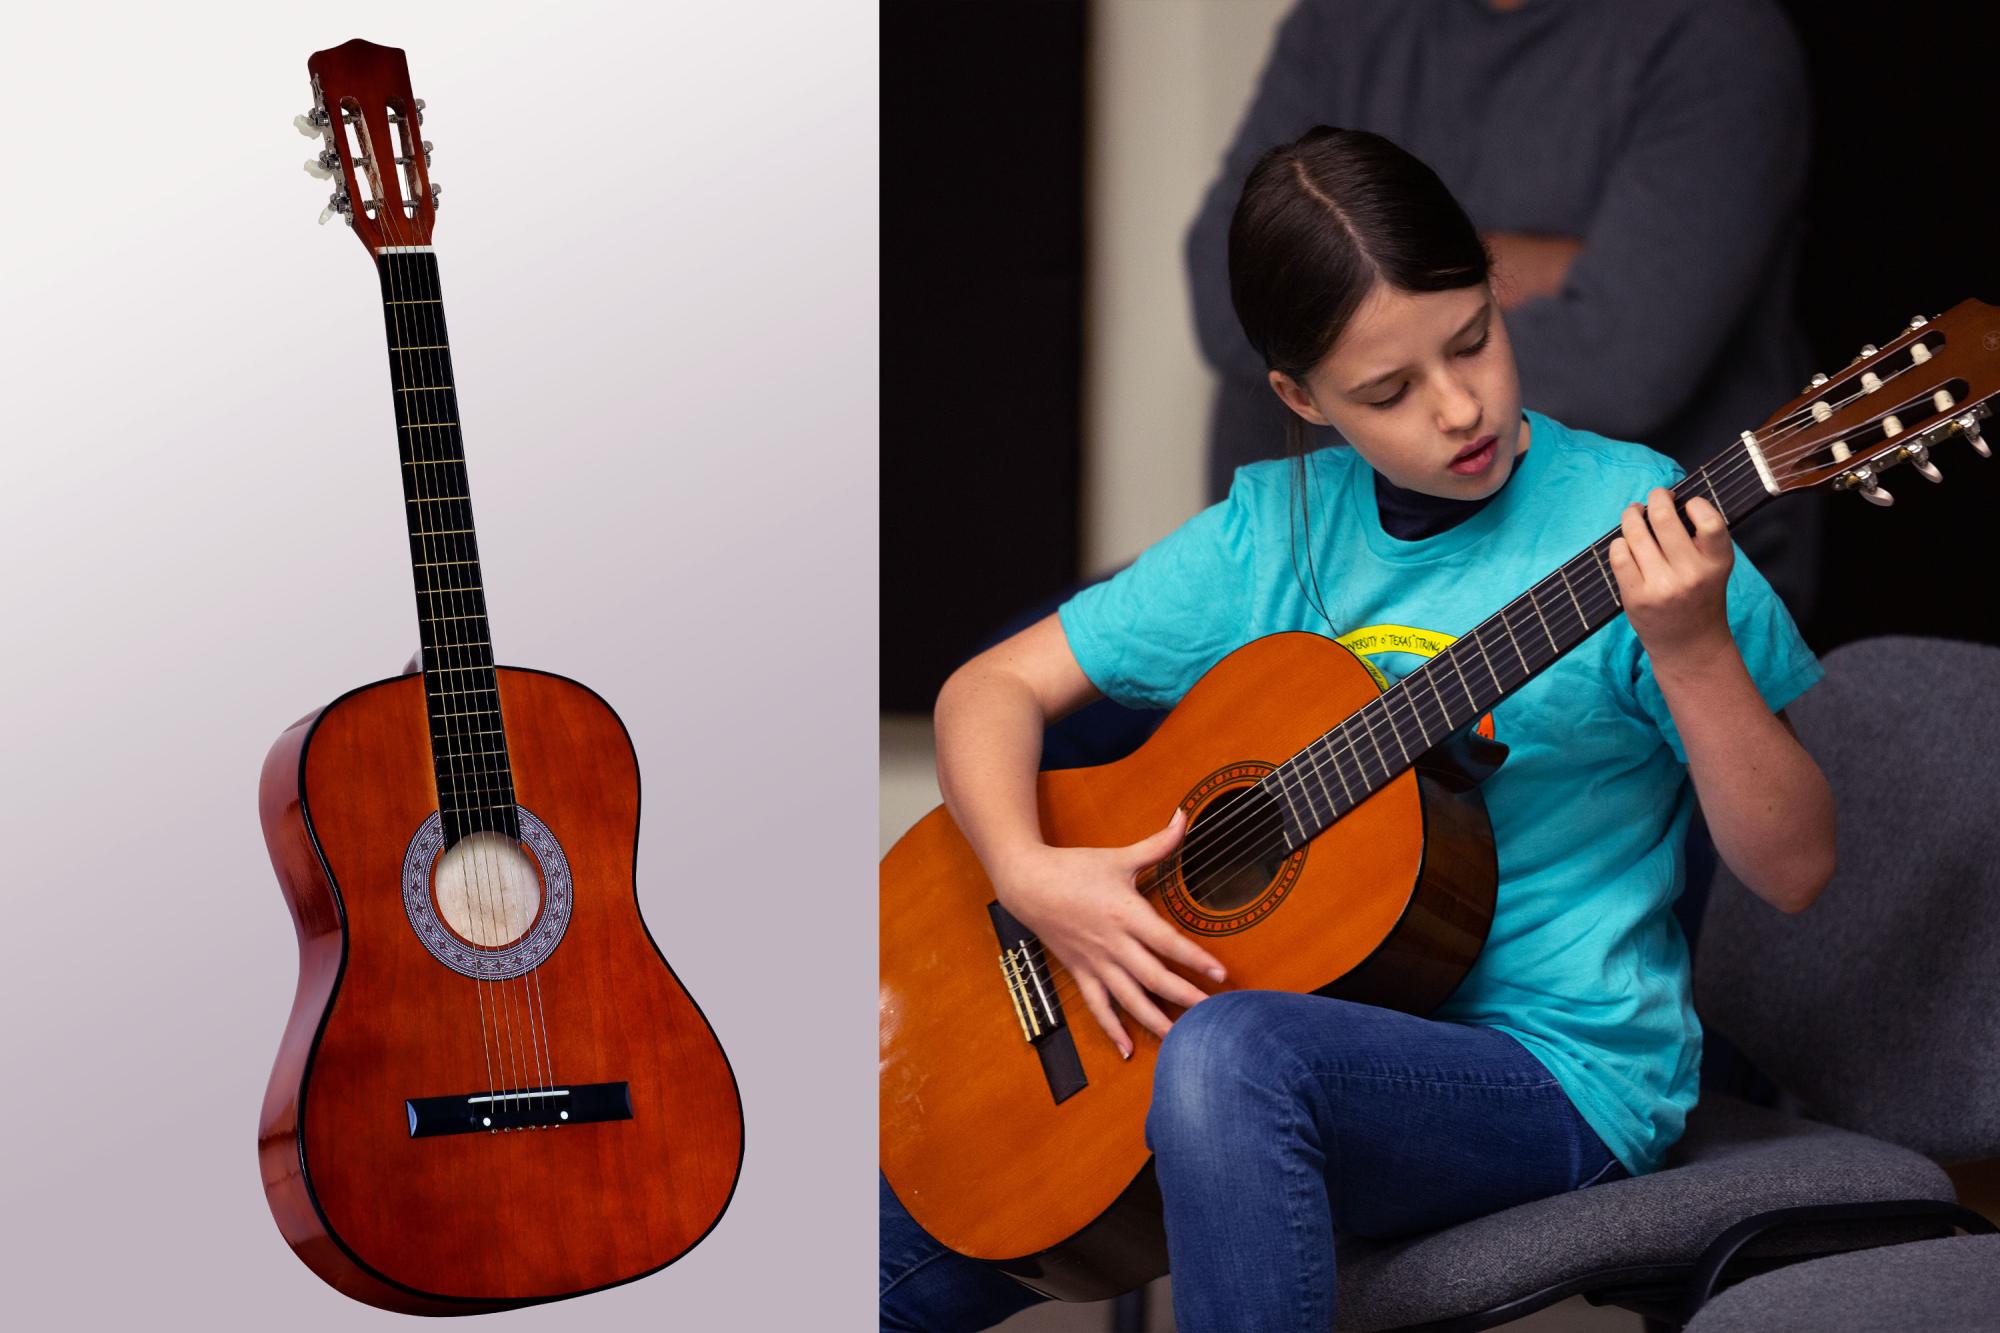 a side-by-side image of a full sized classical guitar and a small student guitar being played by a young child